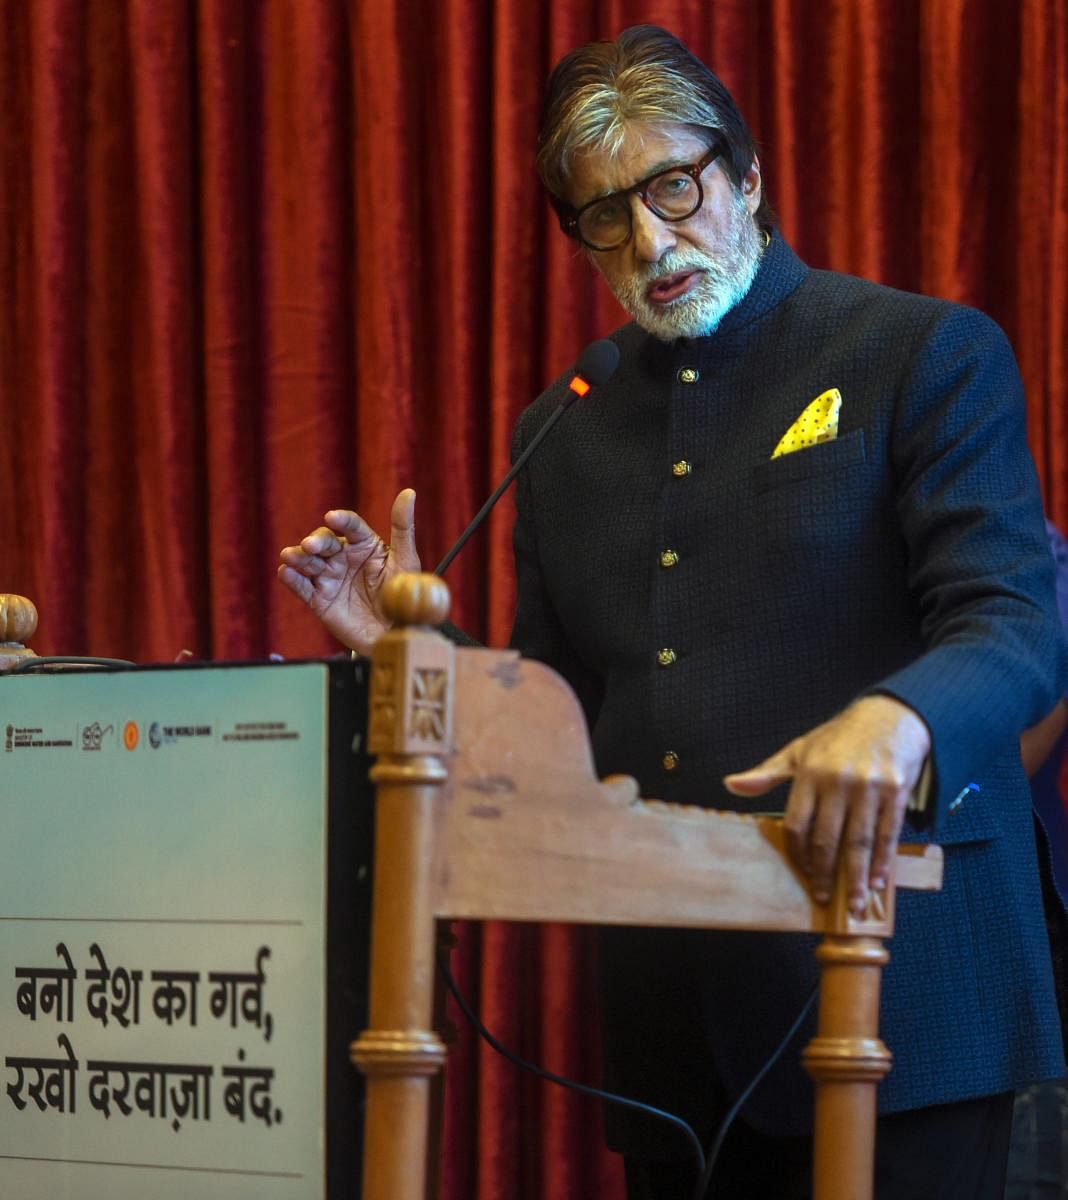 Bachchan to keep reminding people to use toilets